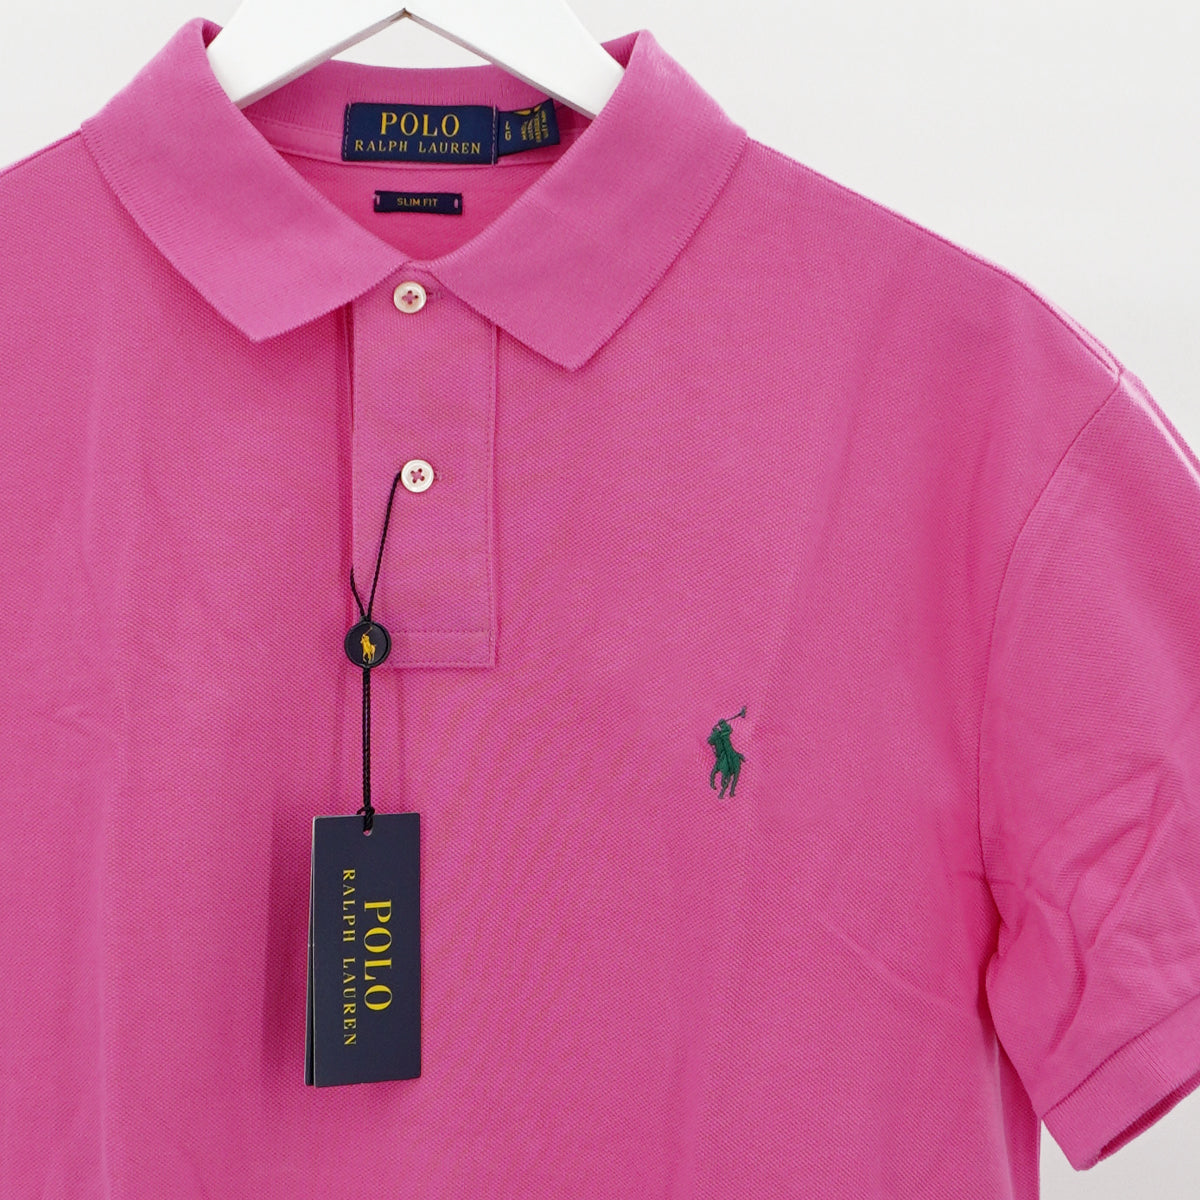 Ralph Lauren Polo Shirt Slim Fit in Maui Pink - Large